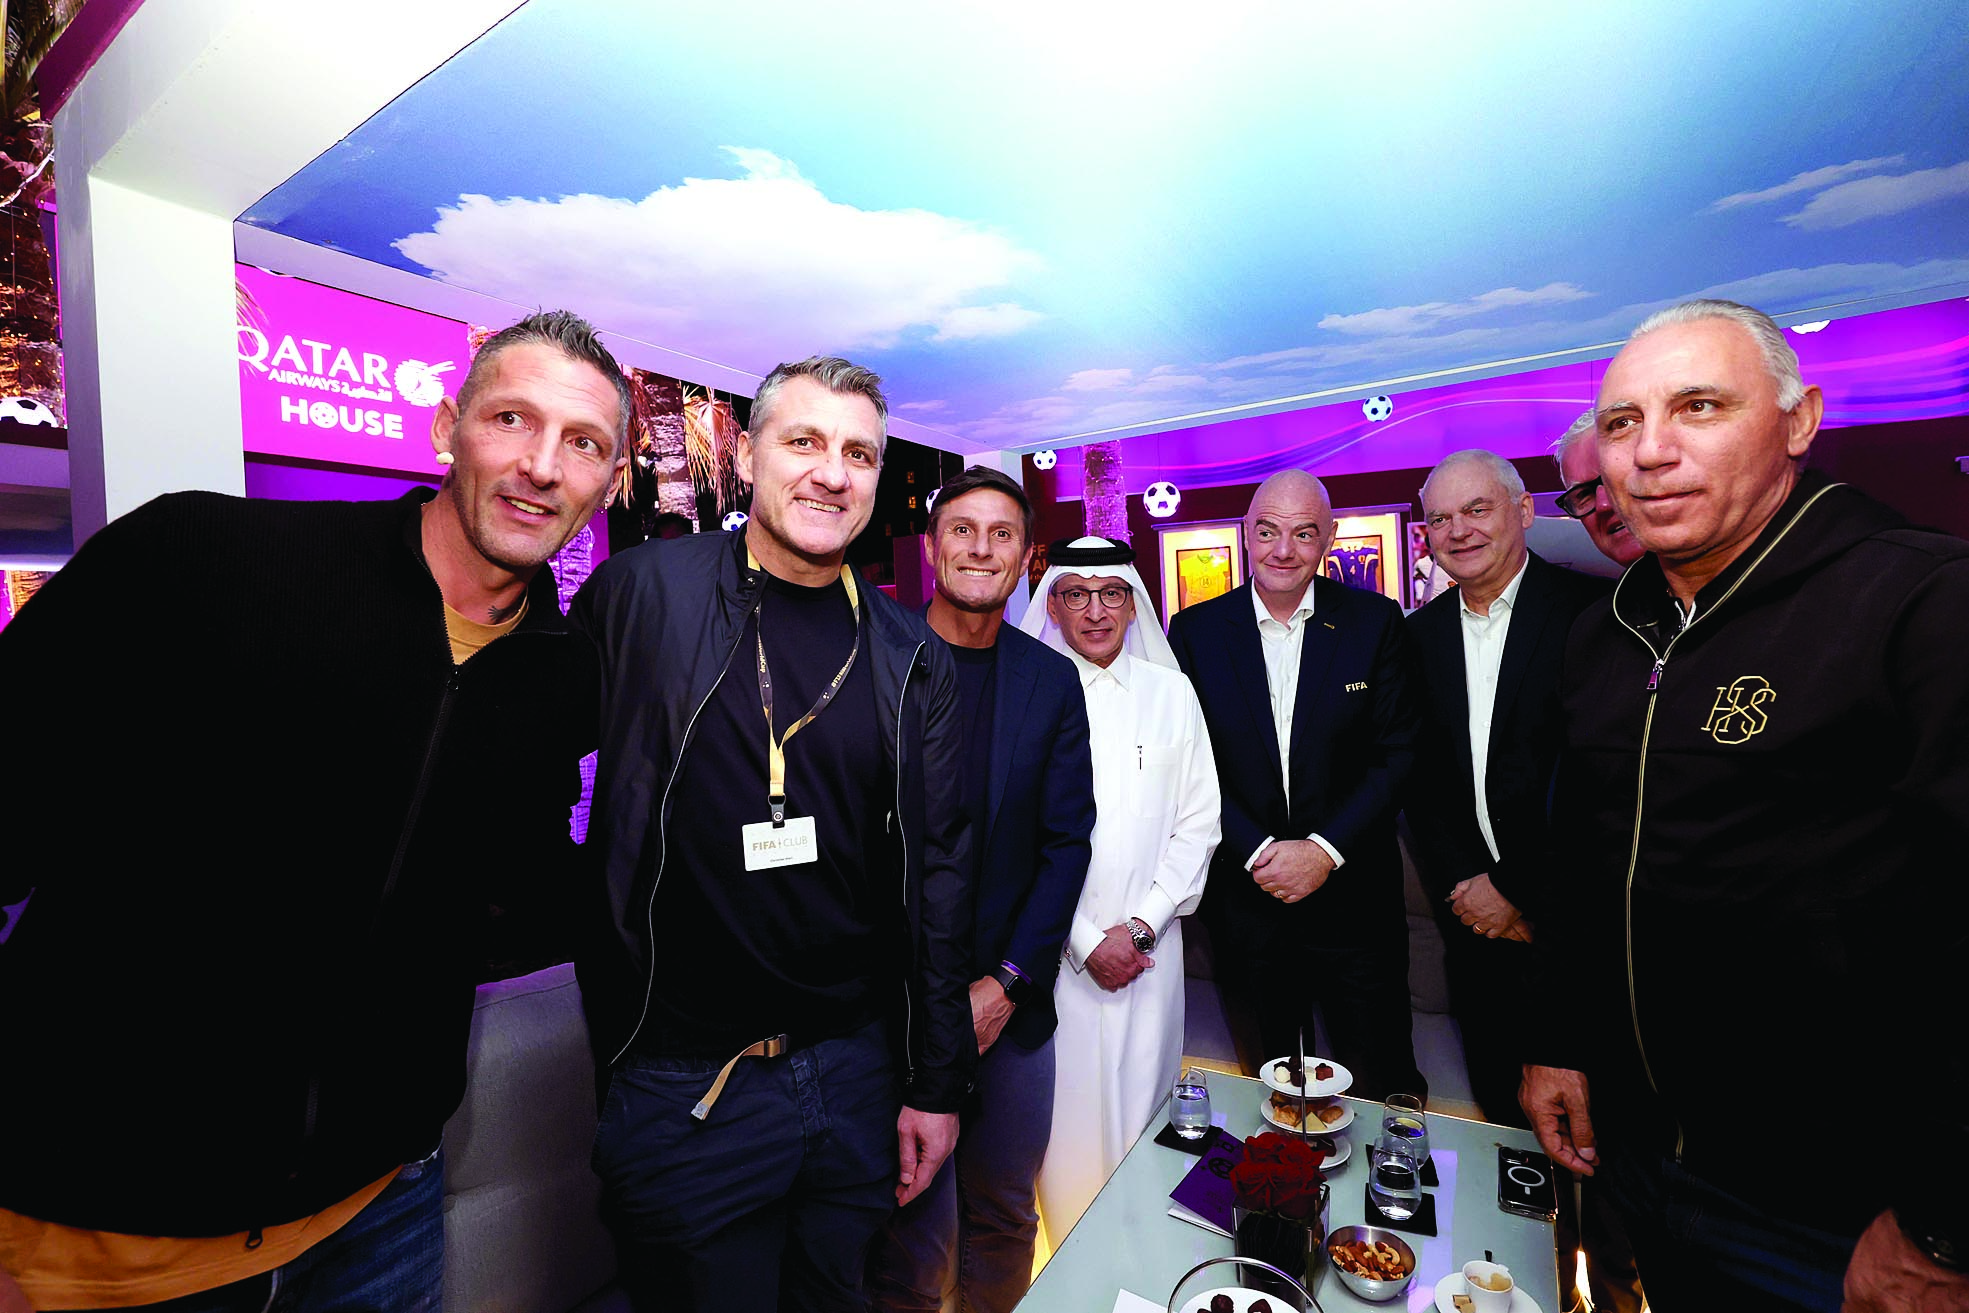 Qatar Airways Brings Football Legends Together to Host Live Draw for FIFA Legends Cup